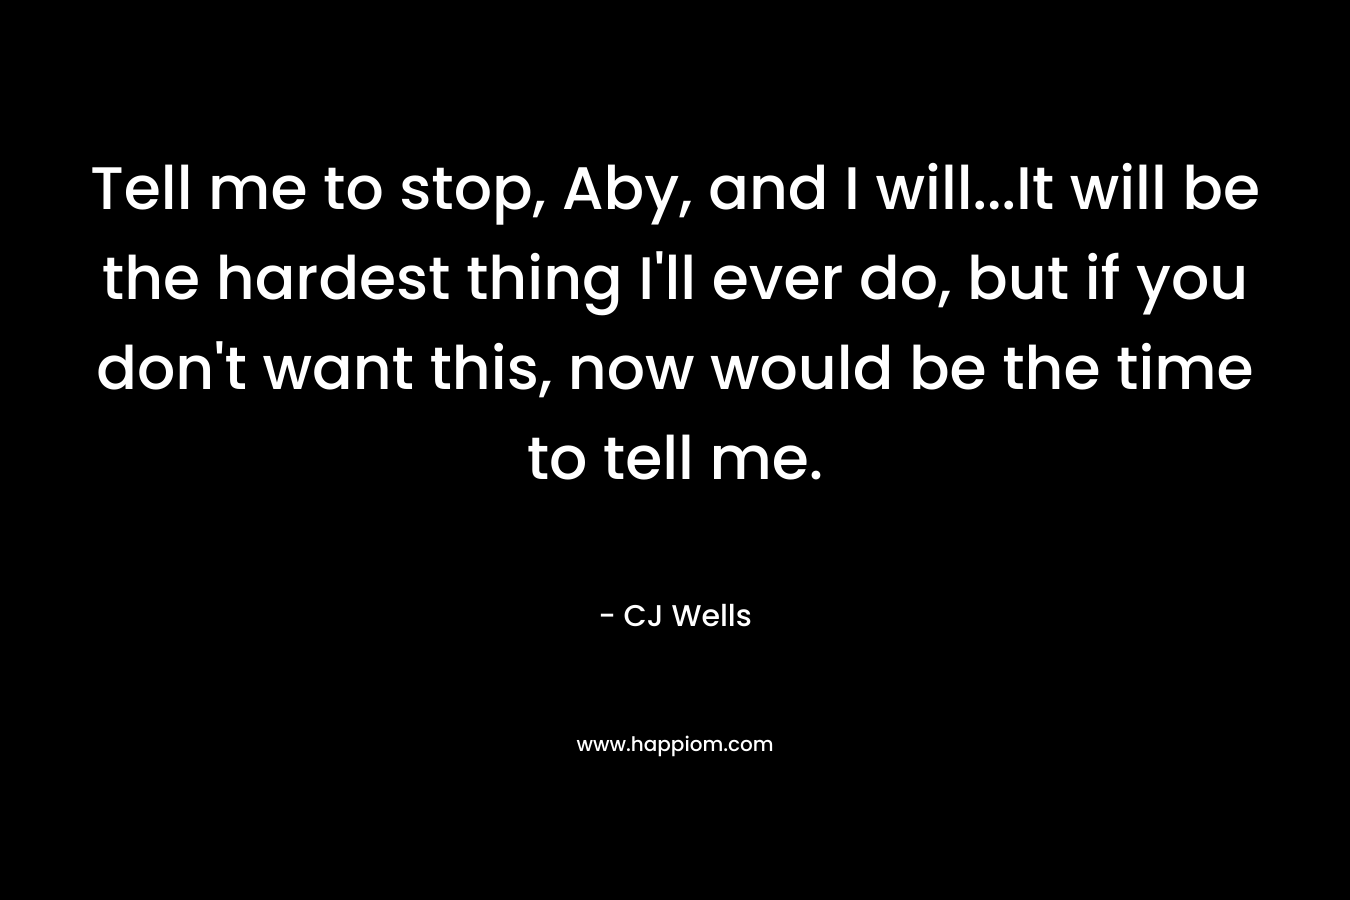 Tell me to stop, Aby, and I will…It will be the hardest thing I’ll ever do, but if you don’t want this, now would be the time to tell me. – CJ Wells